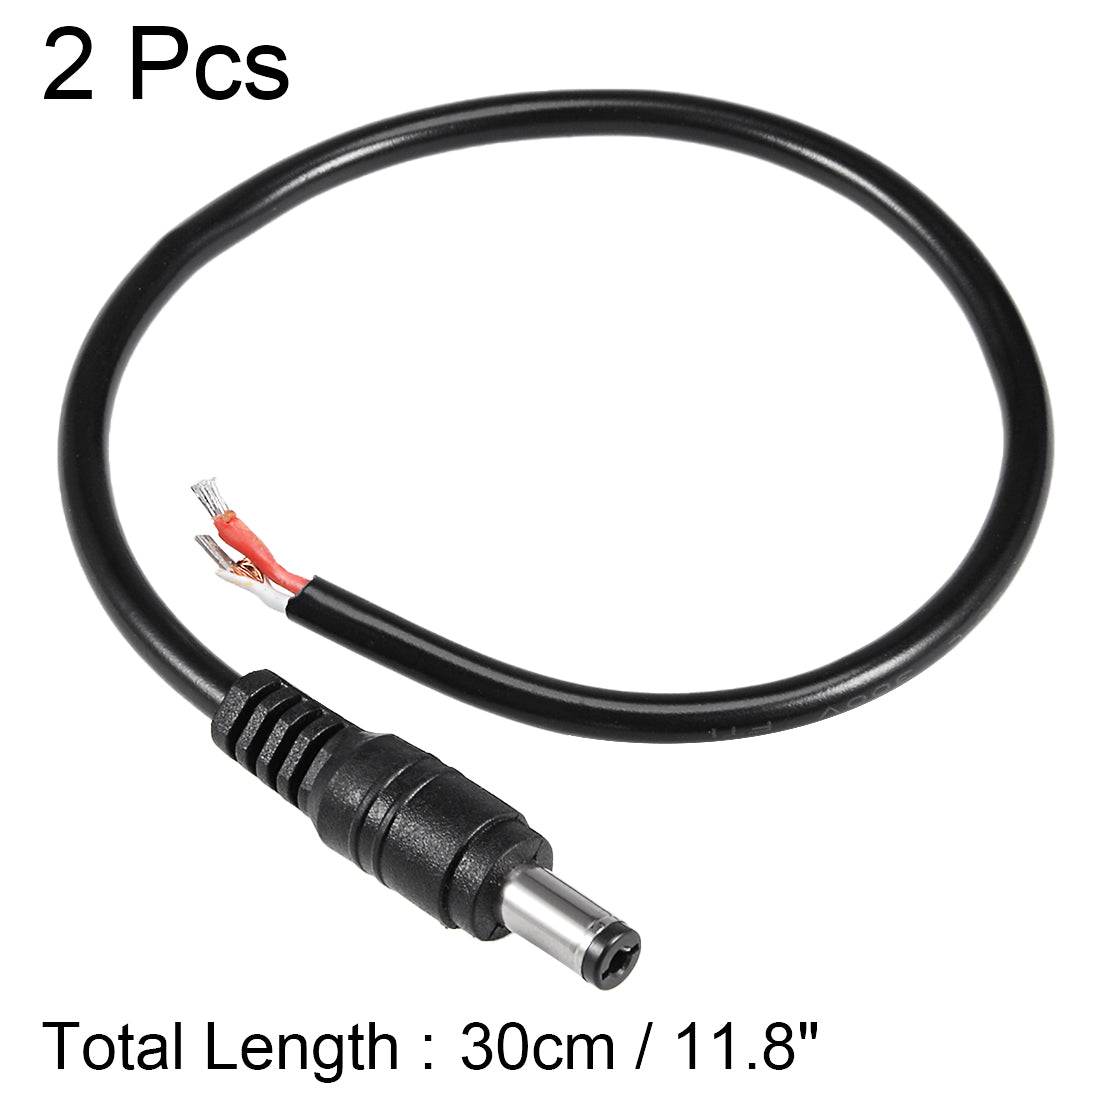 uxcell Uxcell 2Pcs 30cm 10A Plastic Male DC Power Pigtail Ultra Thick Cable Connector for CCTV Security Camera 2.1 x 5.5mm